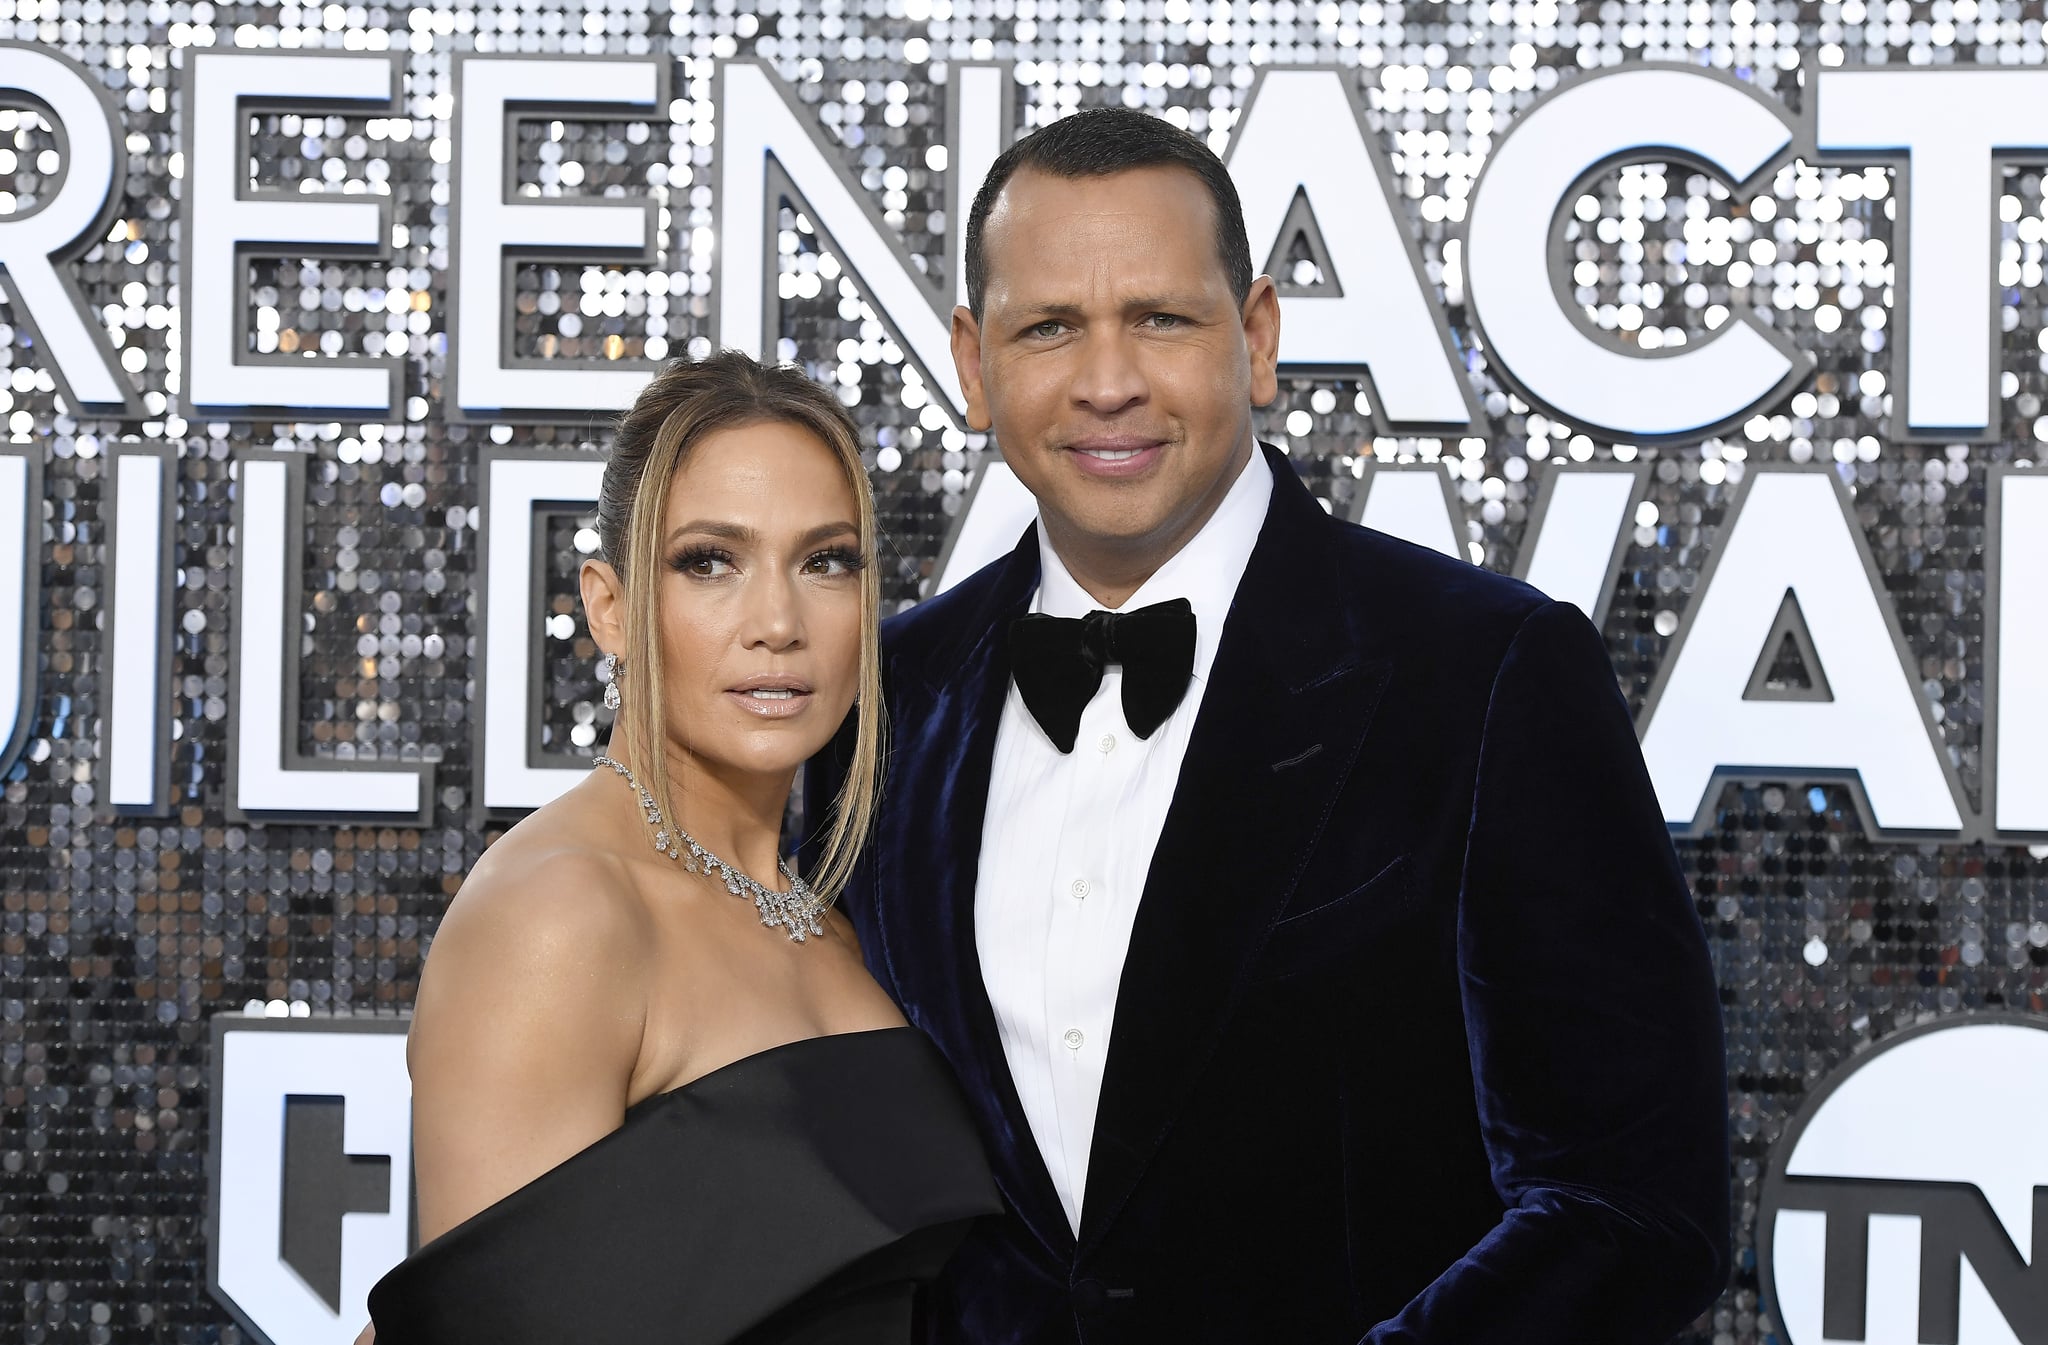 LOS ANGELES, CALIFORNIA - JANUARY 19: (L-R) Jennifer Lopez and Alex Rodriguez attend the 26th Annual Screen Actors Guild Awards at The Shrine Auditorium on January 19, 2020 in Los Angeles, California. (Photo by Frazer Harrison/Getty Images)